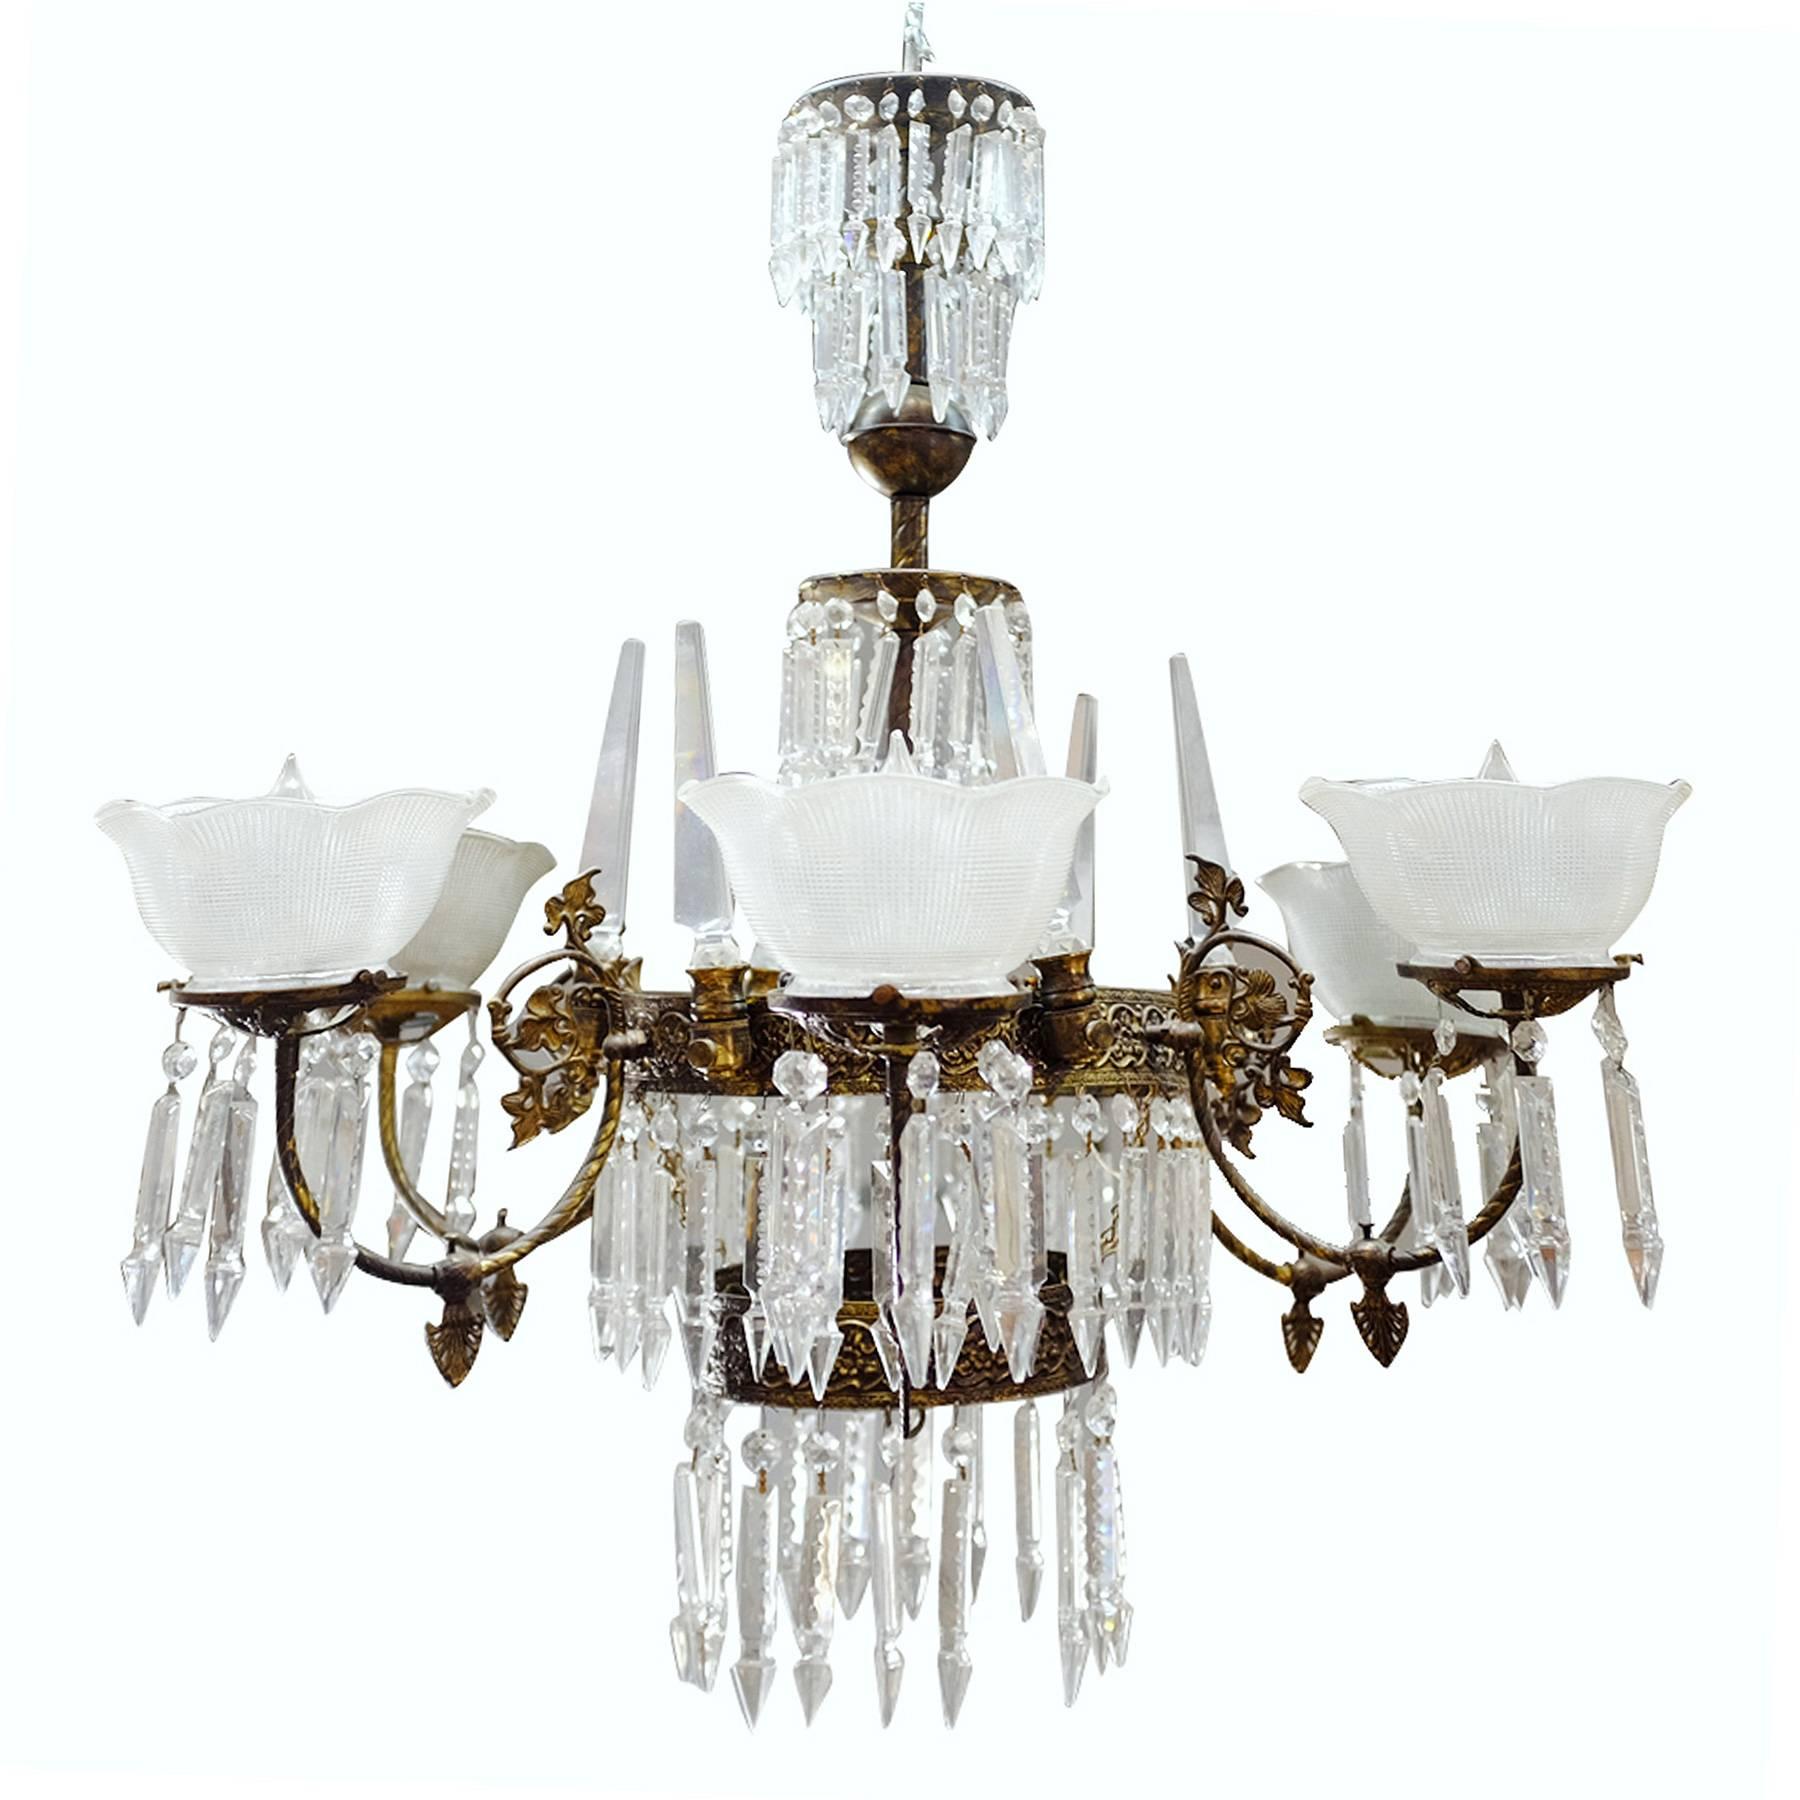 Romanesque style Six-light electric chandelier featuring a mix of hang crystal and handkerchief shade shades, circa 1980.

Available Five.